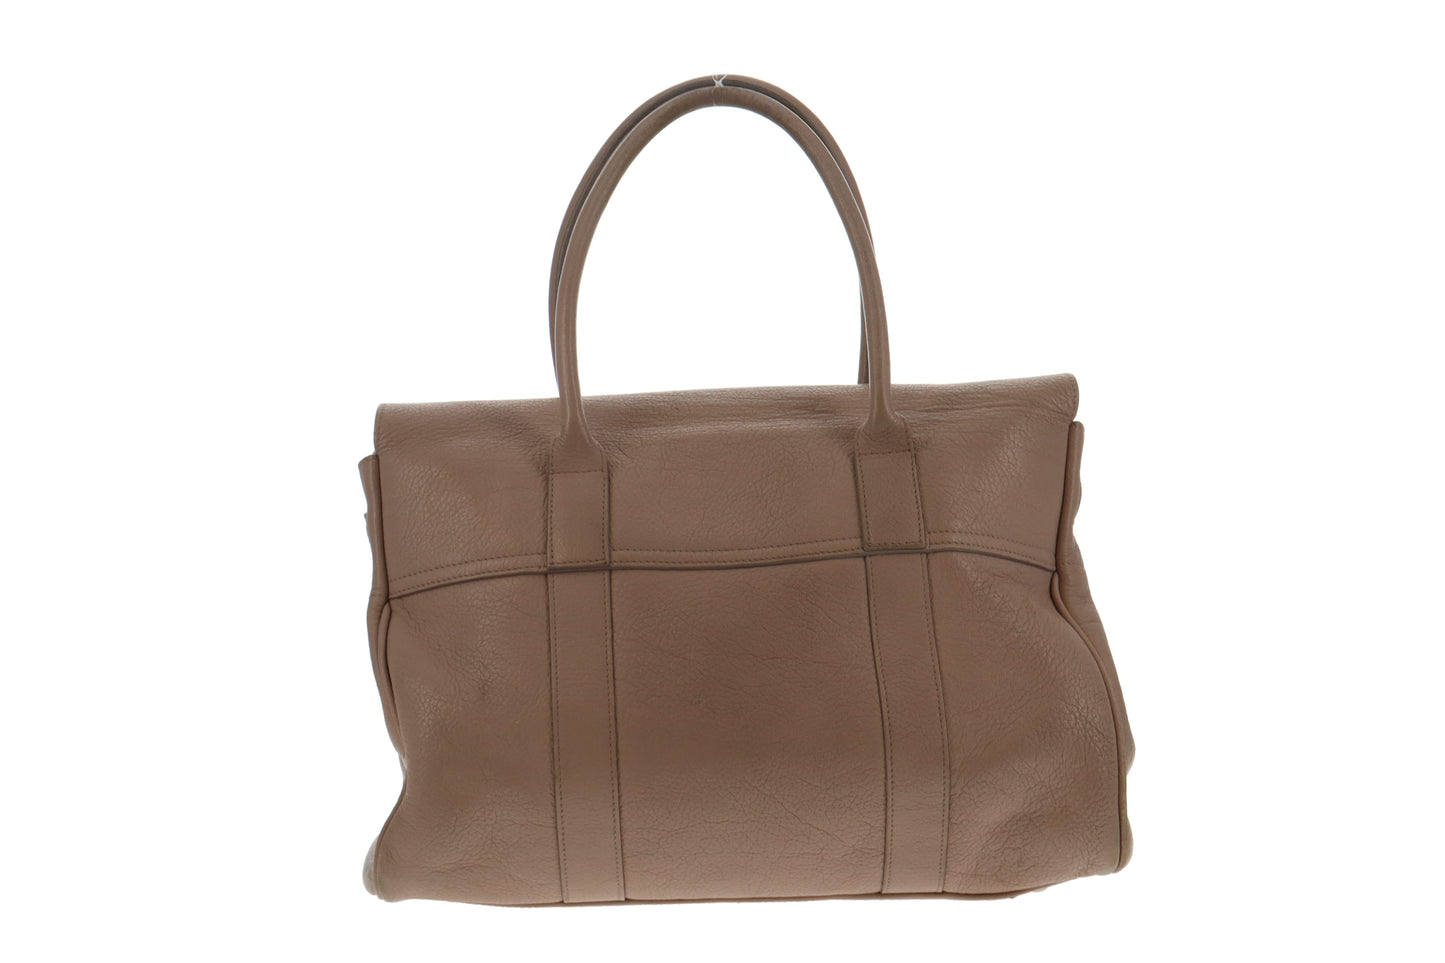 Mulberry Bayswater Putty With Nickle Hardware